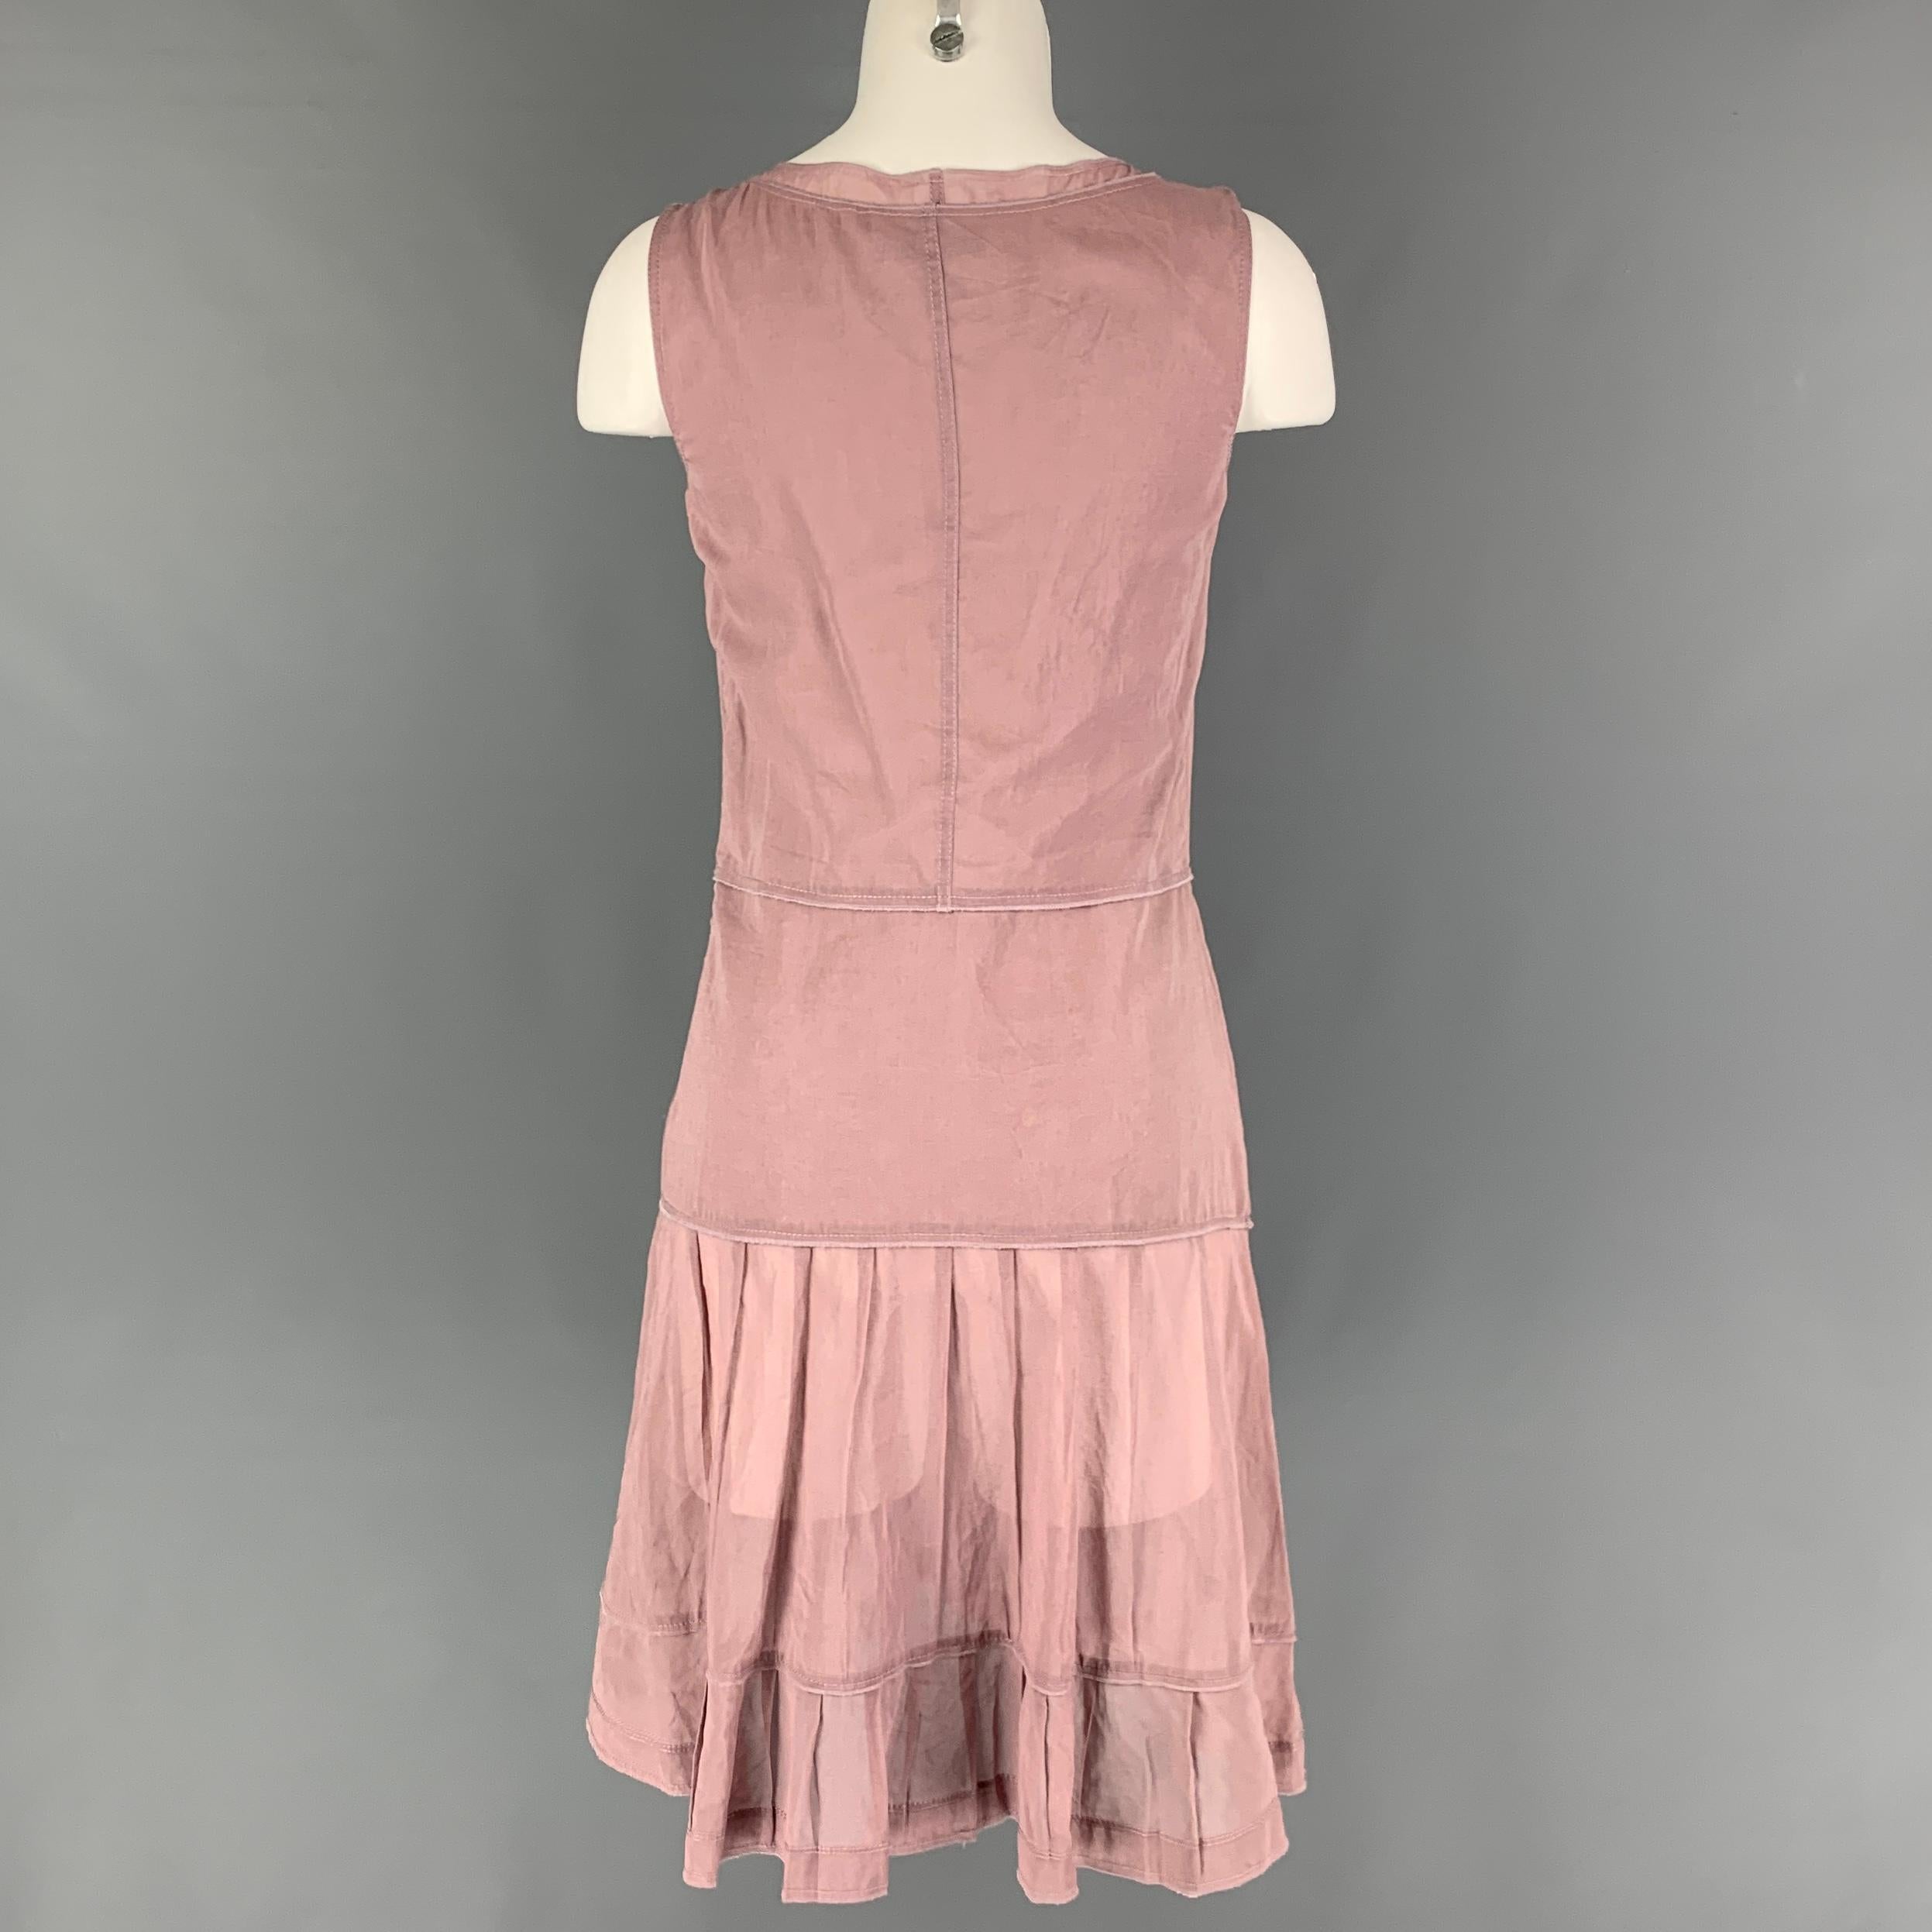 JIL SANDER dress comes in a dust pink cotton featuring a pleated style, double layered, sleeveless, and a side zipper closure. Made in Italy. 

Good Pre-Owned Condition. Small mark at front. As-Is.
Marked: 36

Measurements:

Shoulder: 13 in.
Bust: